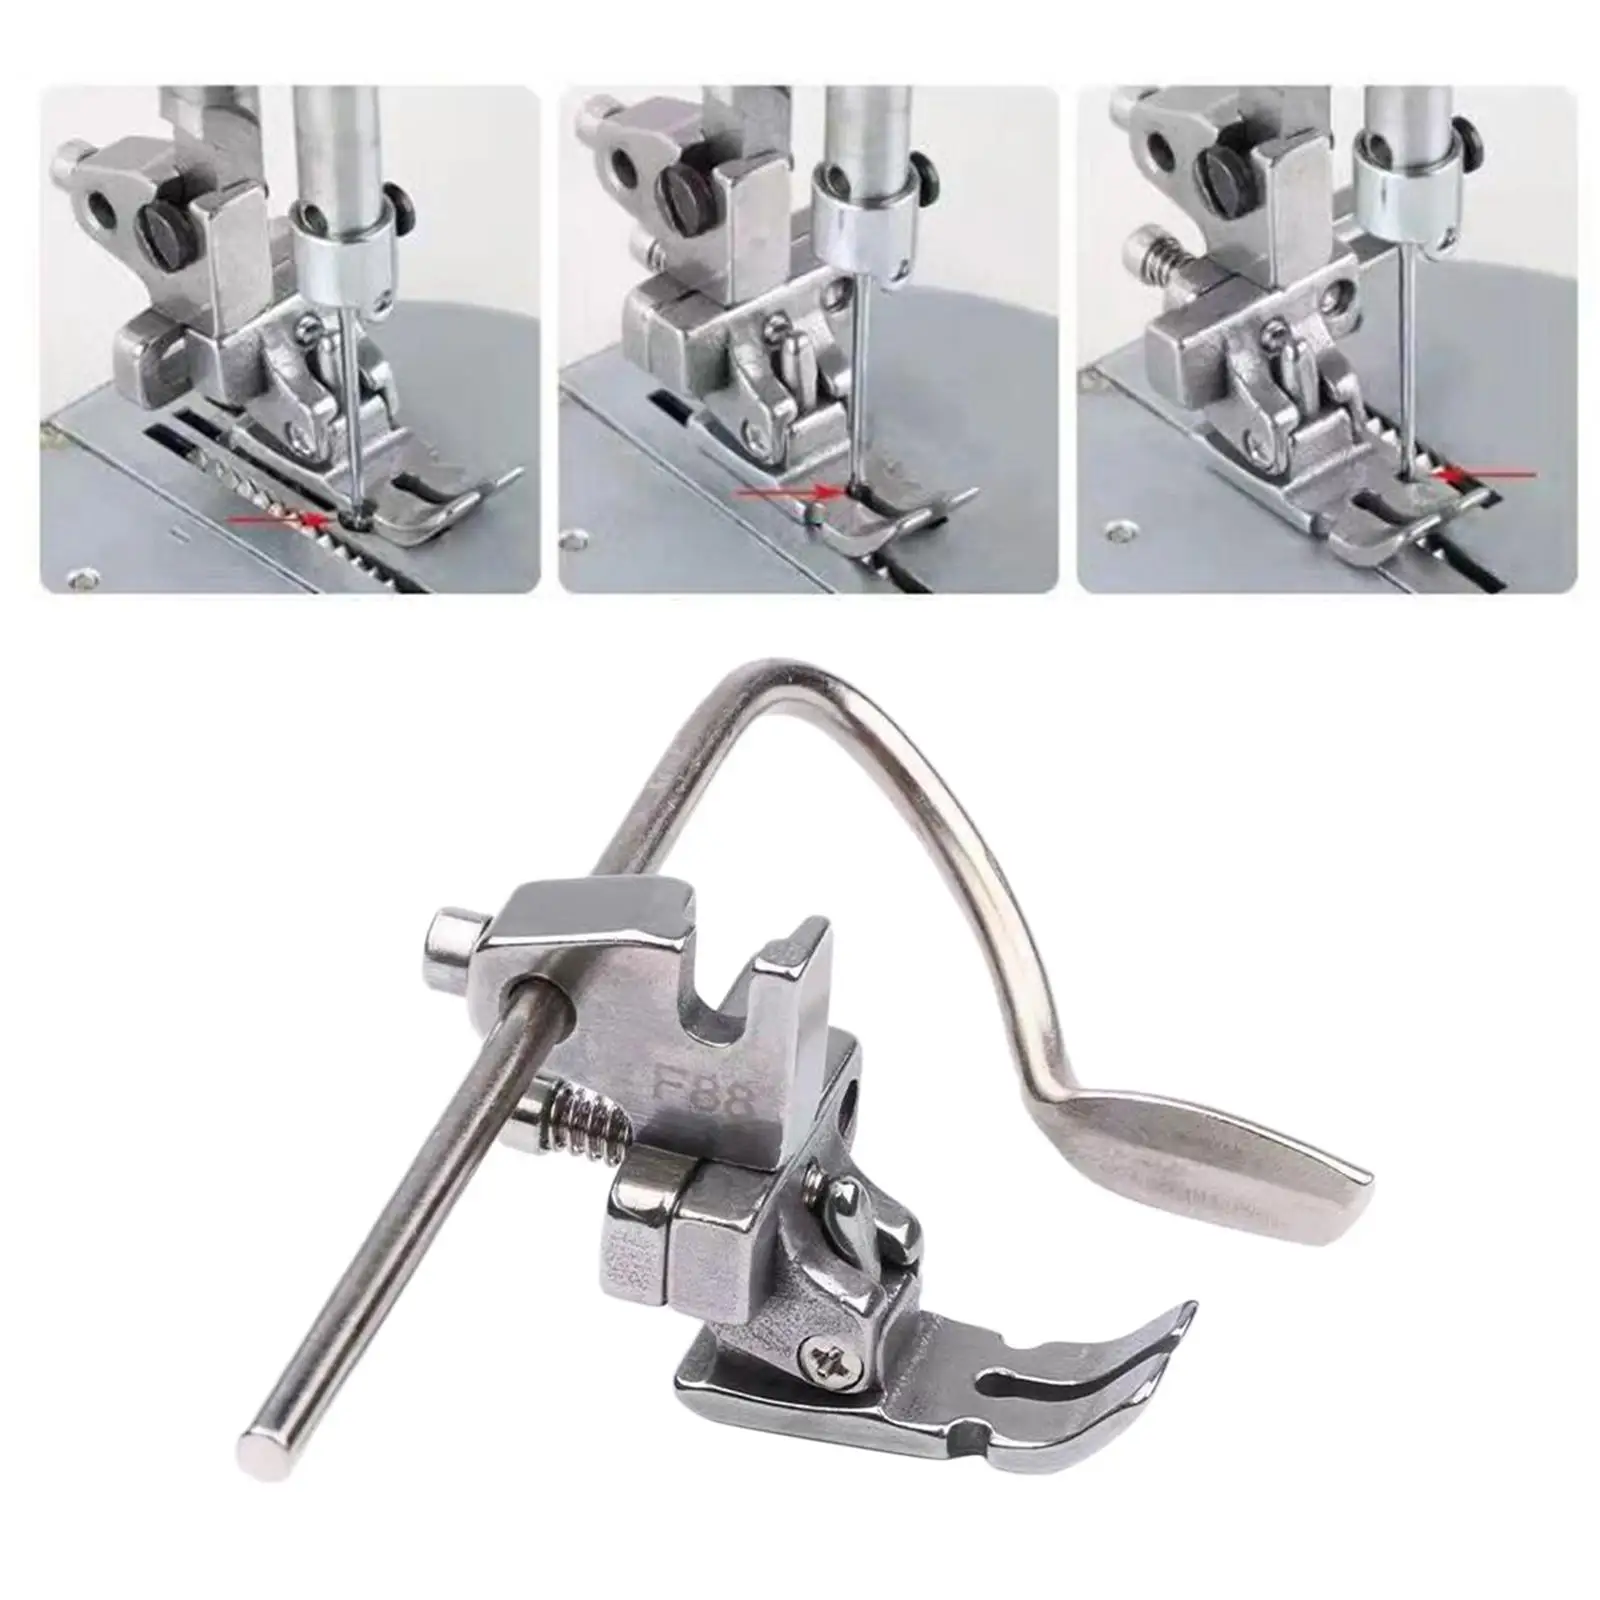 Presser Foot for Sewing Machine Straight Stitch Presser Foot for Pillow Cover Bag Sewing Cording DIY Arts Crafts Clothes